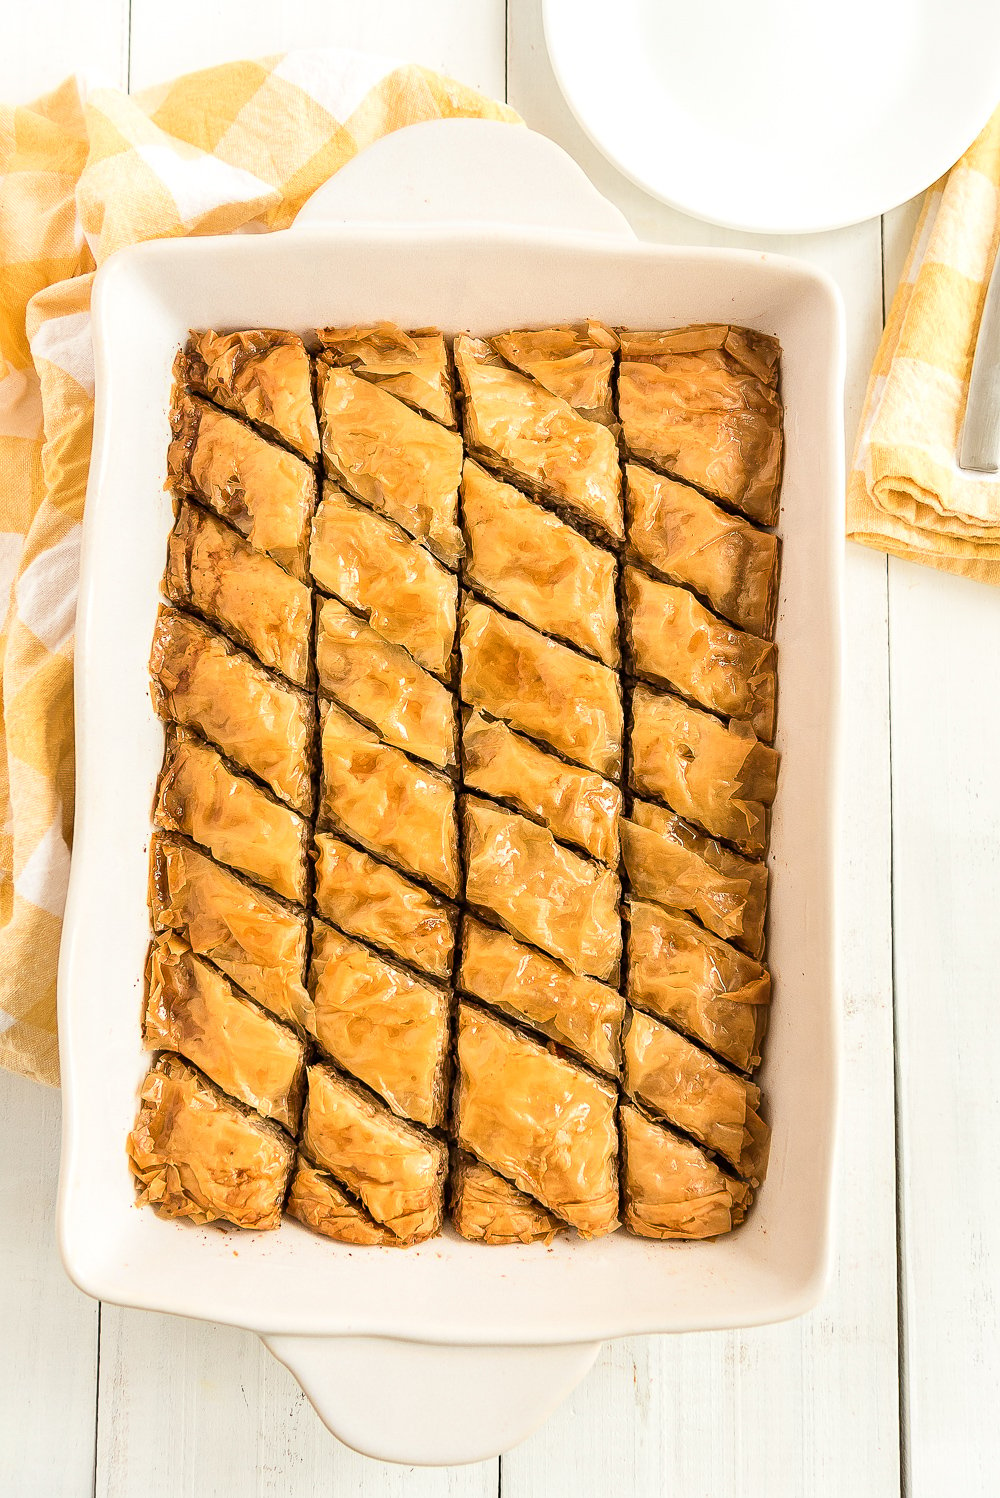 Large baking dish filled with homemade baklava.